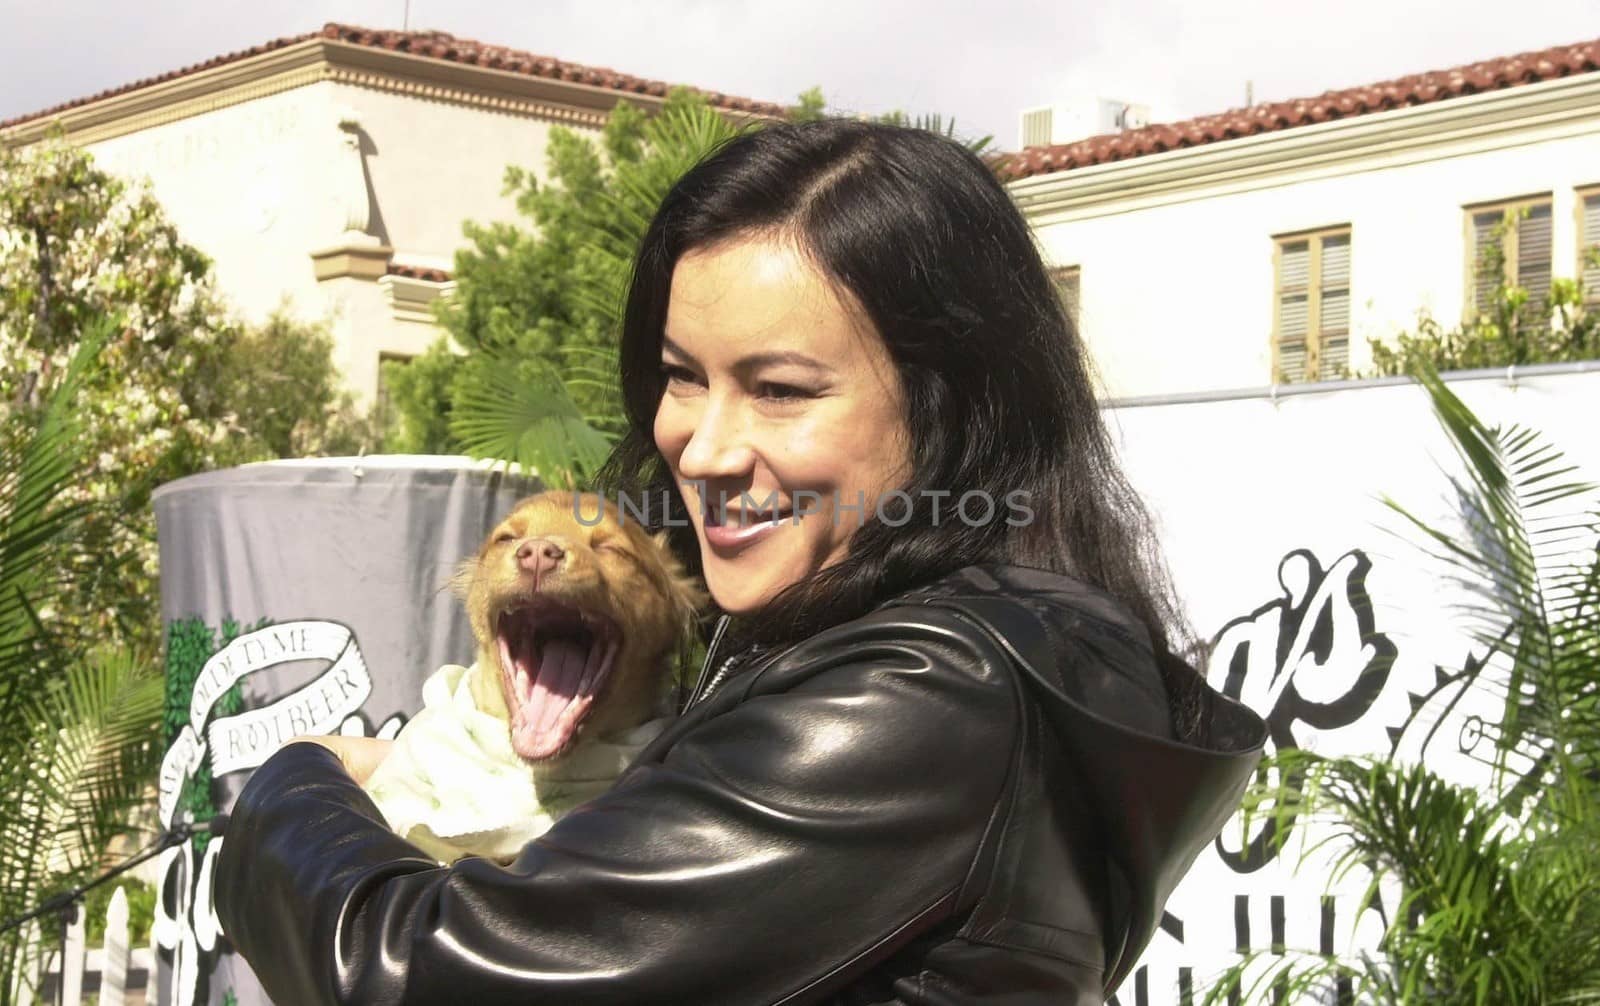 Jennifer Tilly at the "Barqs On The Backlot" event sponsored by Barq's Rootbeer, where celebrities and their dogs are the stars. 02-12-00